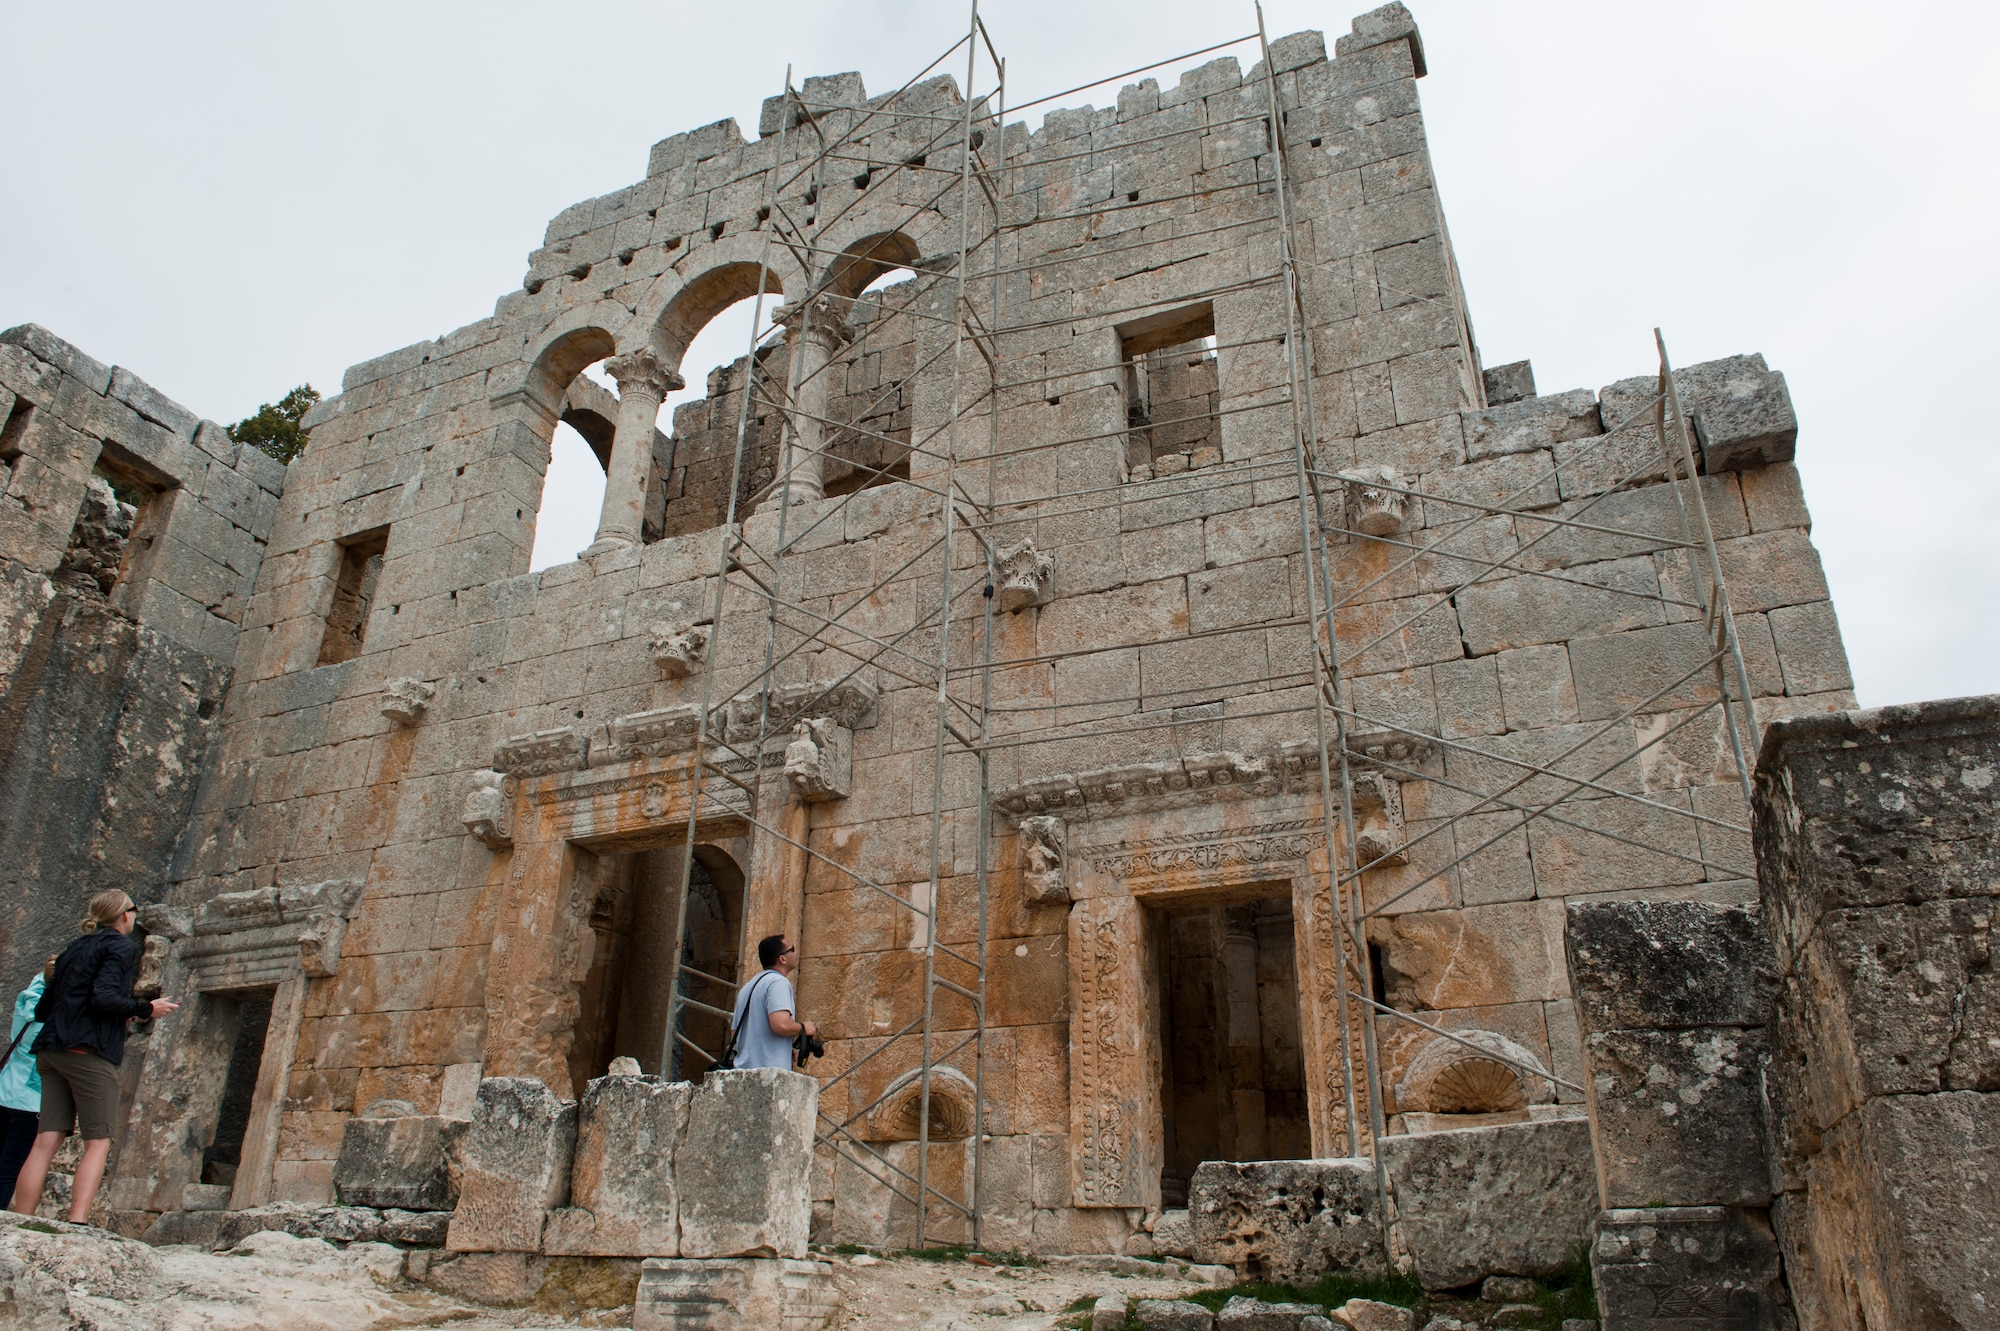 Visitors to Alahan Monastery gaze at its impressive architecture and remains March 31, 2013, in Turkey. Though more than 1,400 years old, many of the remnants of the monastery remain intact. Alahan is one of several trips offered by various base agencies at Incirlik Air Base, Turkey. (U.S. Air Force photo by Senior Airman Daniel Phelps/Released)